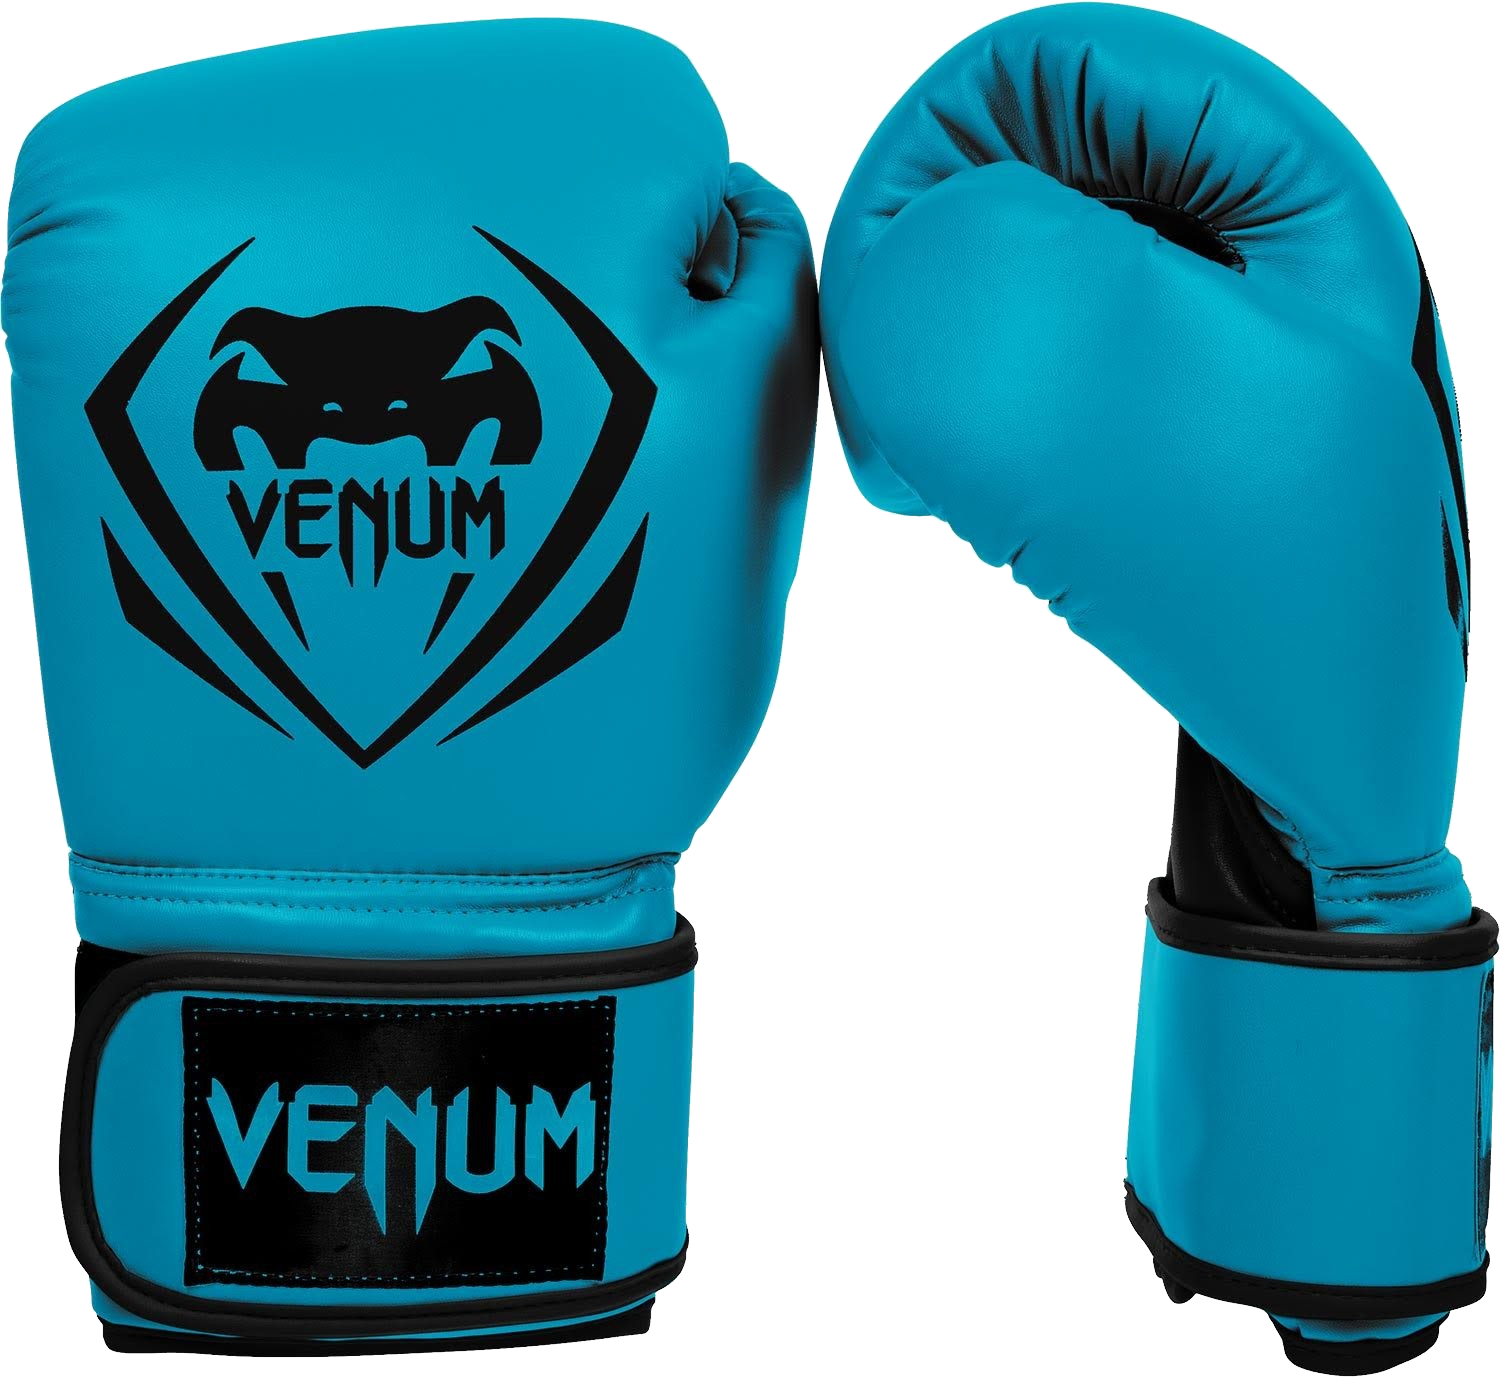 Boxing Gloves Png Image - Venum Contender Boxing Gloves - Gray (1500x1377)